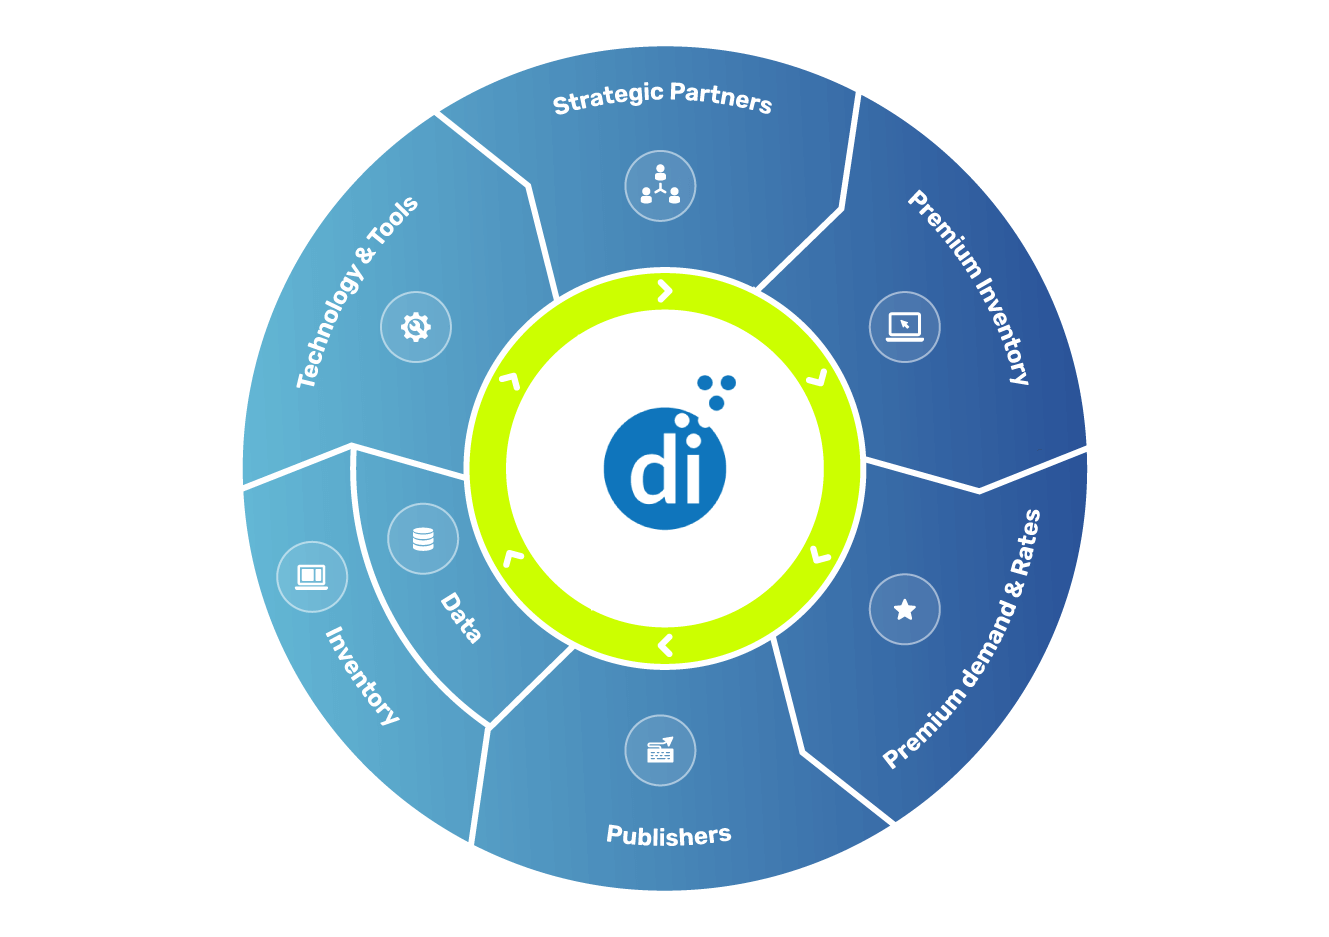 flywheel diagram depicting how didna works with publishers, vendors, and more